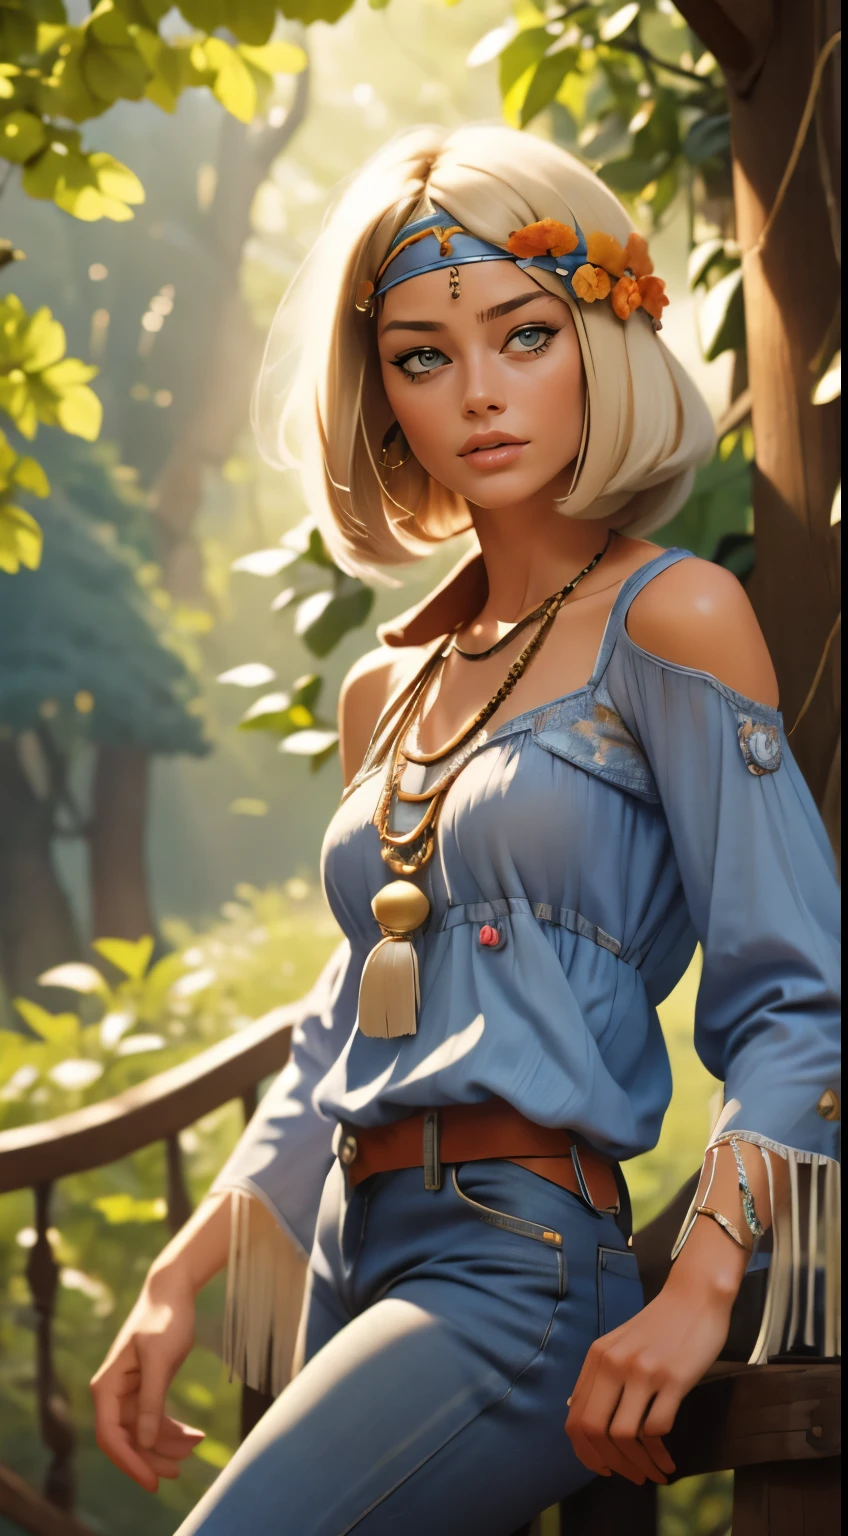 RAW photo of 50 years old Doutzen Kroes, dressed in blue peasant blouse paired with bell-bottom jeans and fringe accessories. She wears a headband or flower crown in her long, flowing hair. The setting is a bohemian-inspired outdoor music festival or a peaceful nature backdrop, capturing the free-spirited and laid-back vibe of the era 60Retro69Punch75, beautiful woman, medium breasts, platinum blond hair,  (bob haircut:1.2), wrinkles on the face,